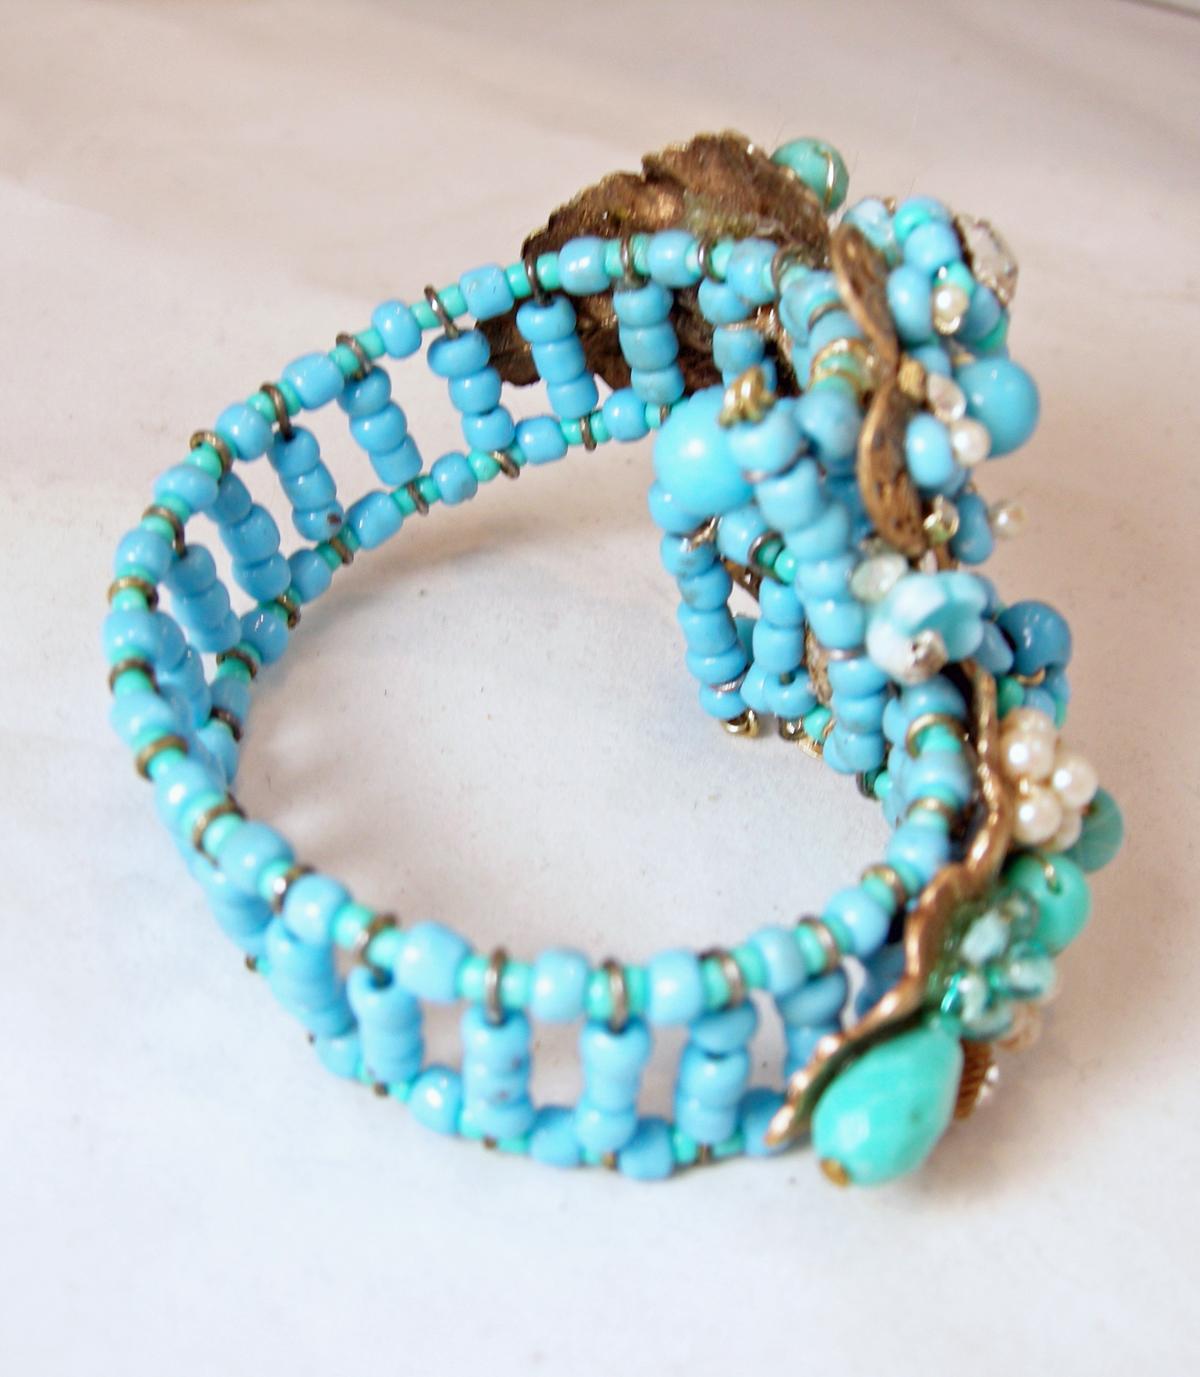 Women's or Men's Vintage Unsigned Miriam Haskell Faux Turquoise, Pearl & Crystal Wrap Bracelet For Sale